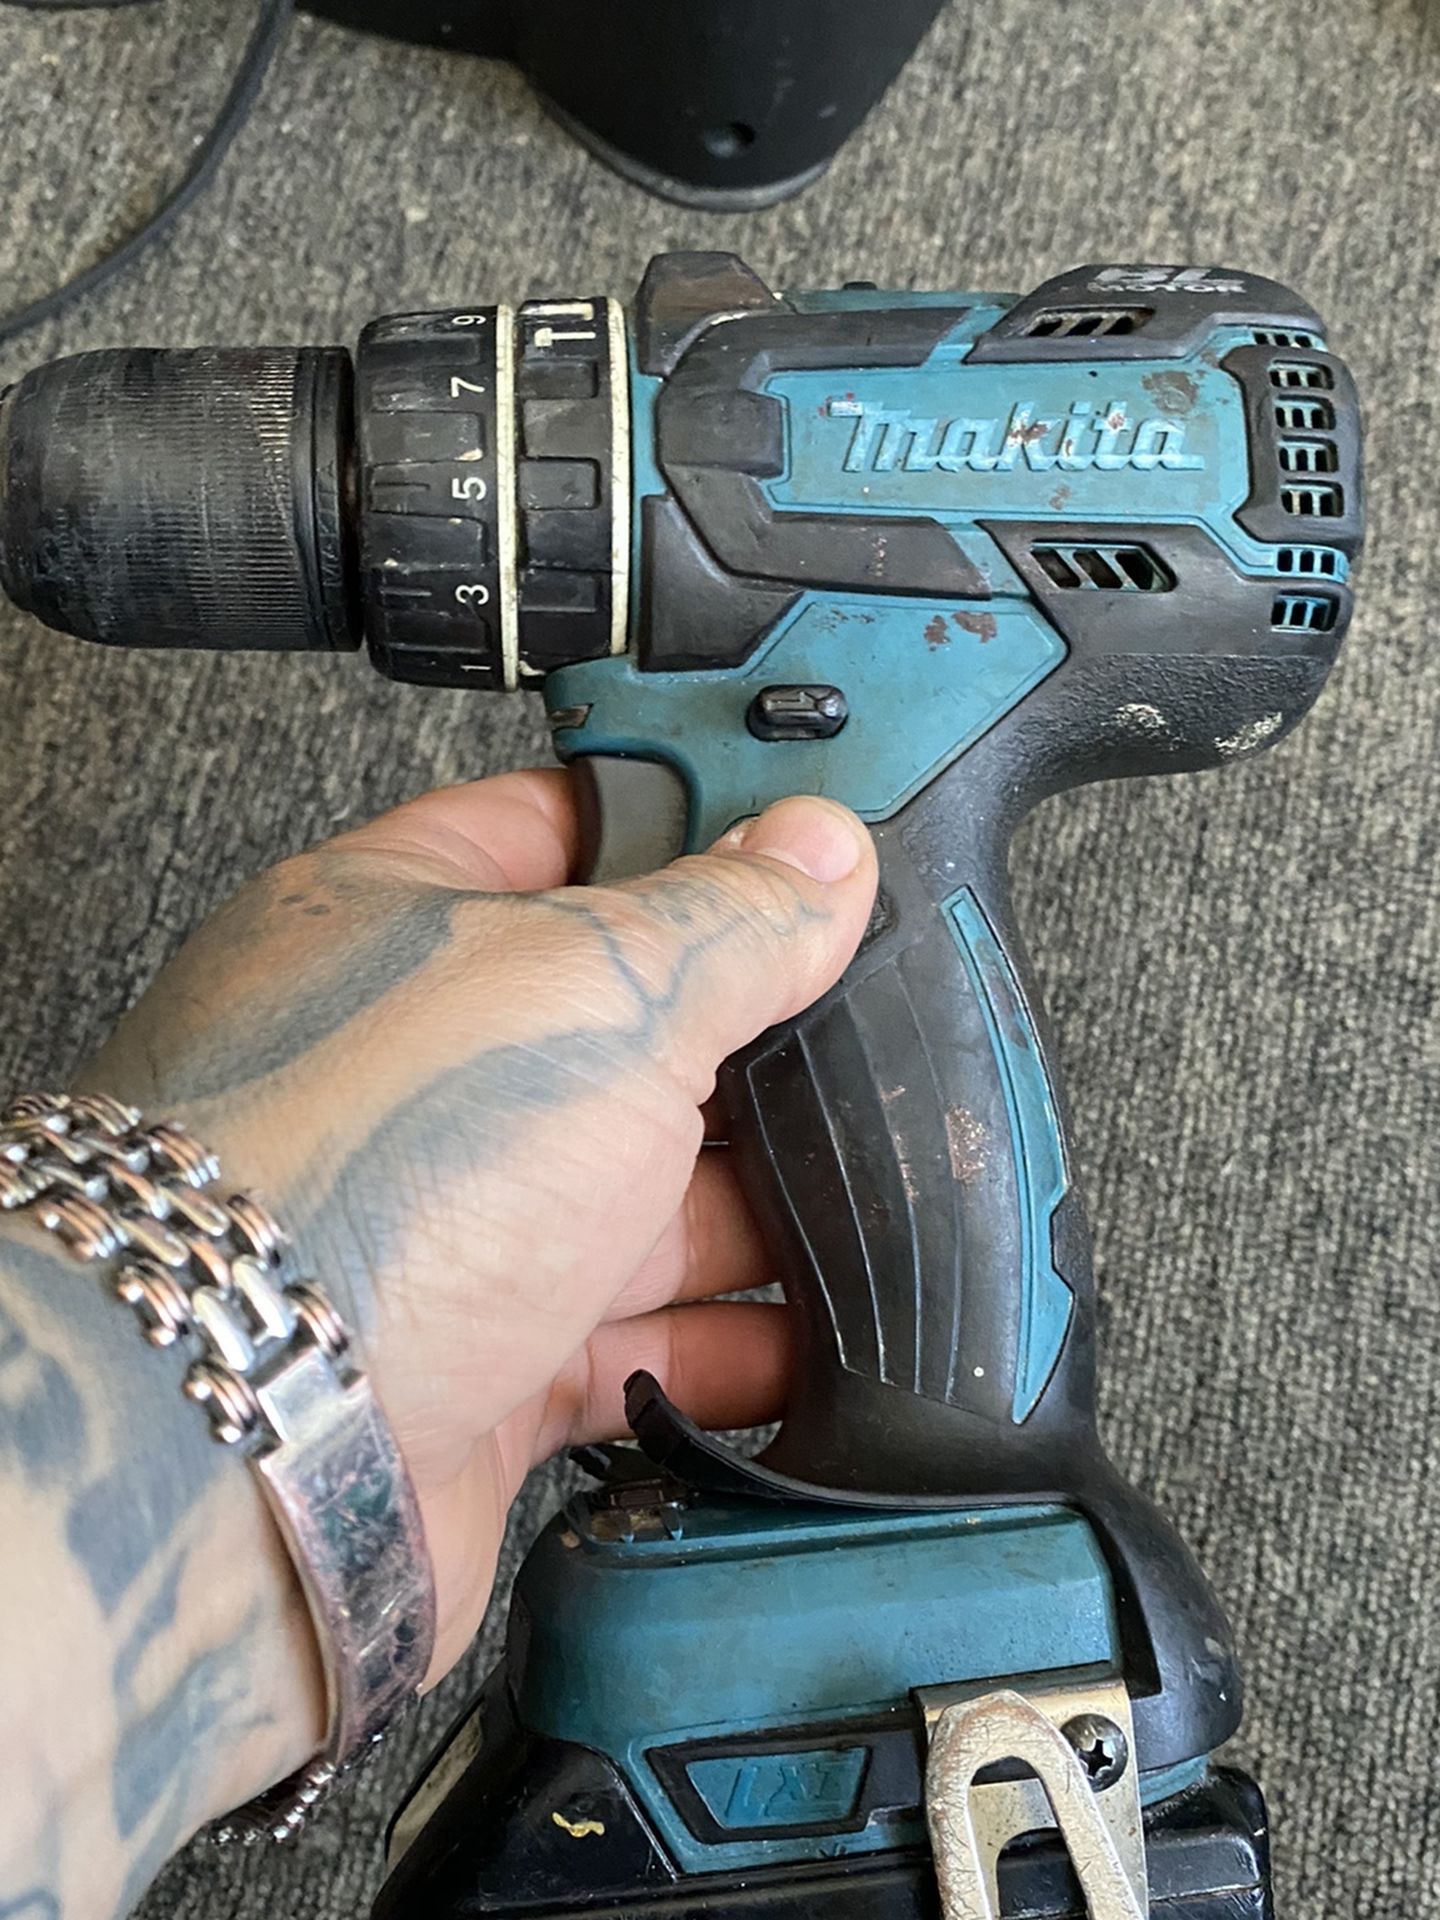 On sale makita drill 1/2(13mm) BL motor 2 speeds comes whit battery $$$70 dollars firm price